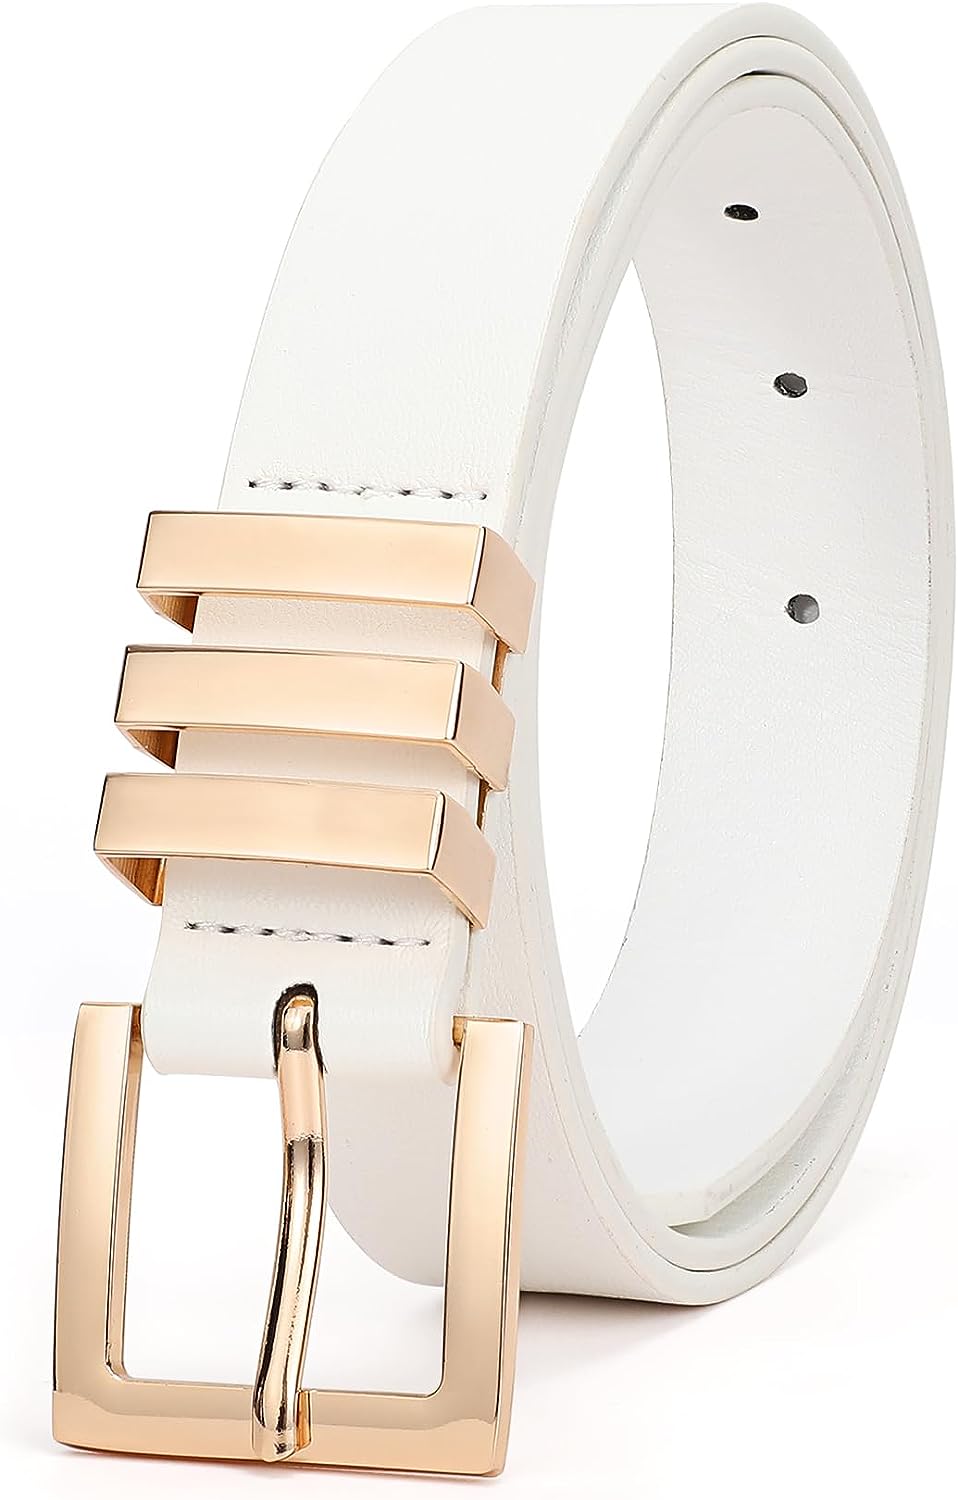 XZQTIVE Plus Size Women's Leather Belts for Jeans Pants Dress Fashion  Ladies Waist Belt with Square Gold Buckle